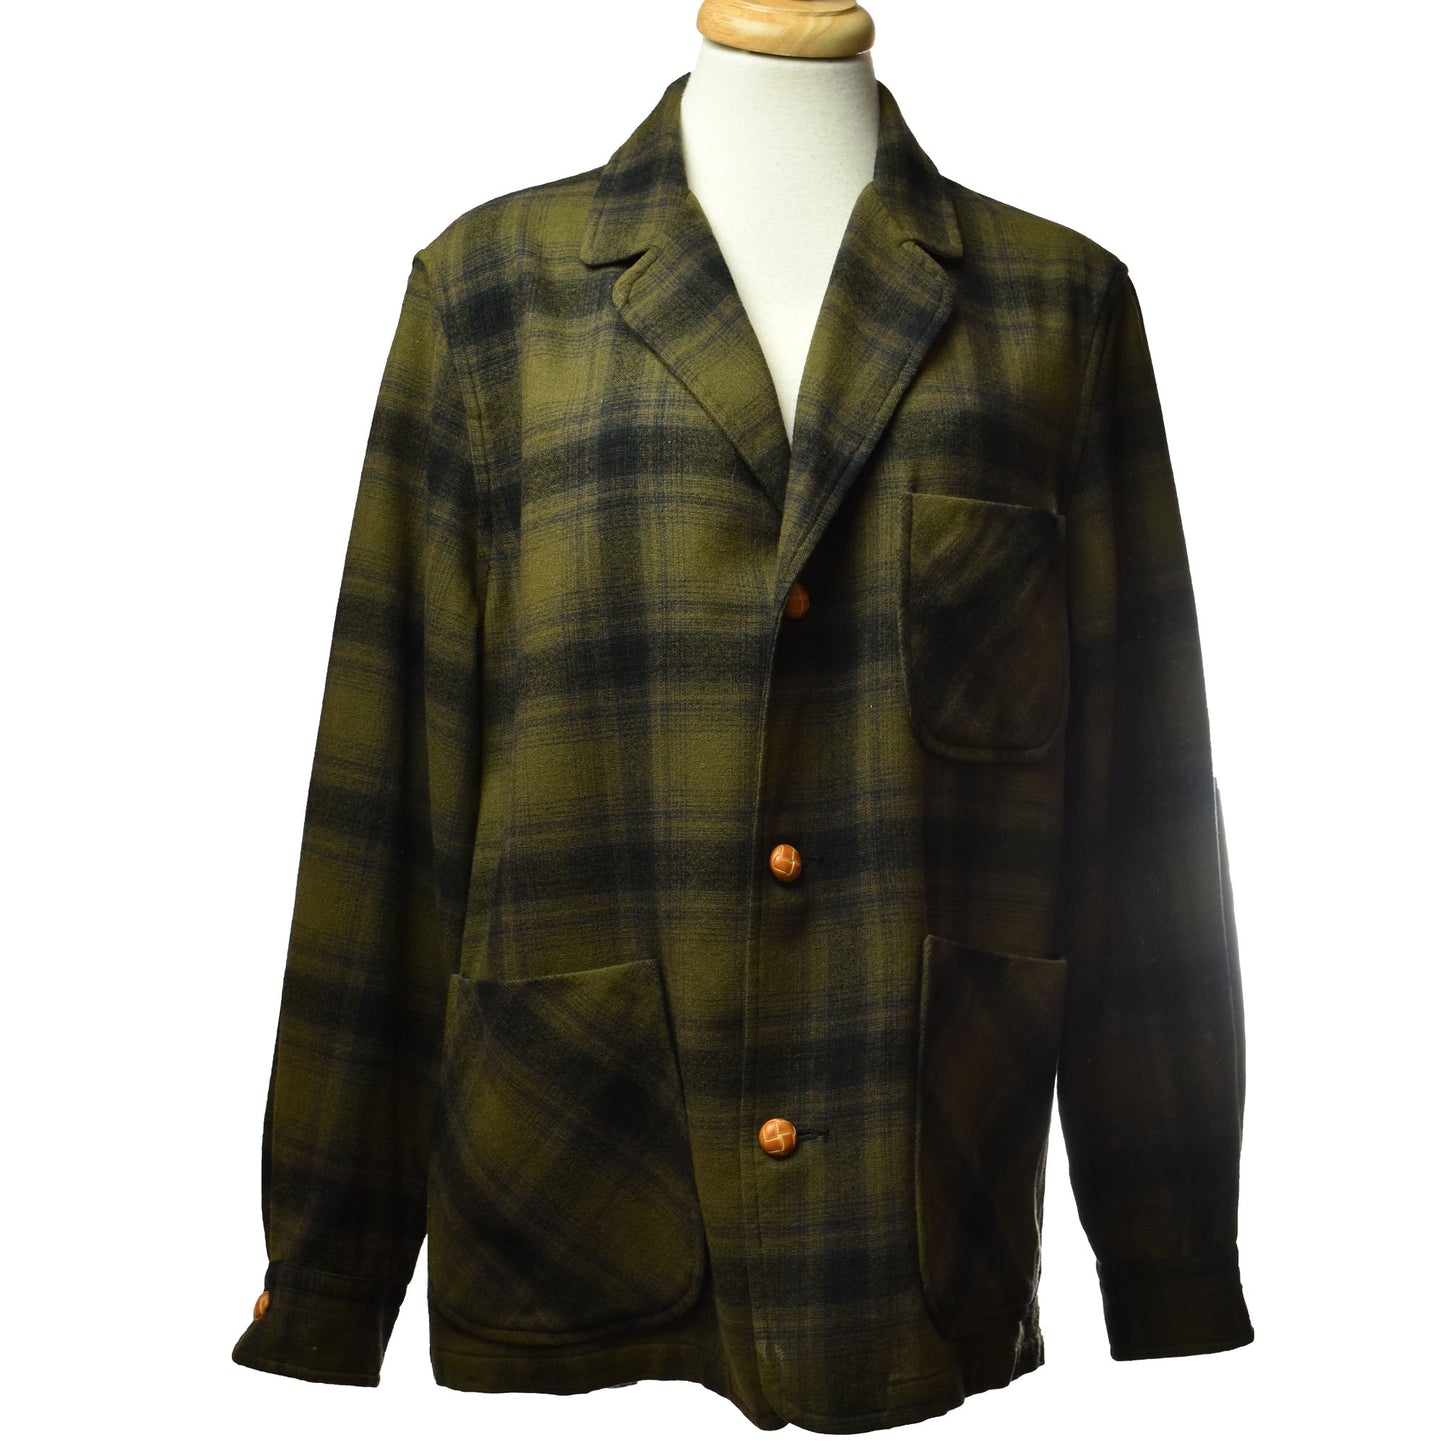 Vintage Pendleton 100% Virginia Wool Forest x Olive Green Plaid 49er Blazer with Woven Leather Buttons